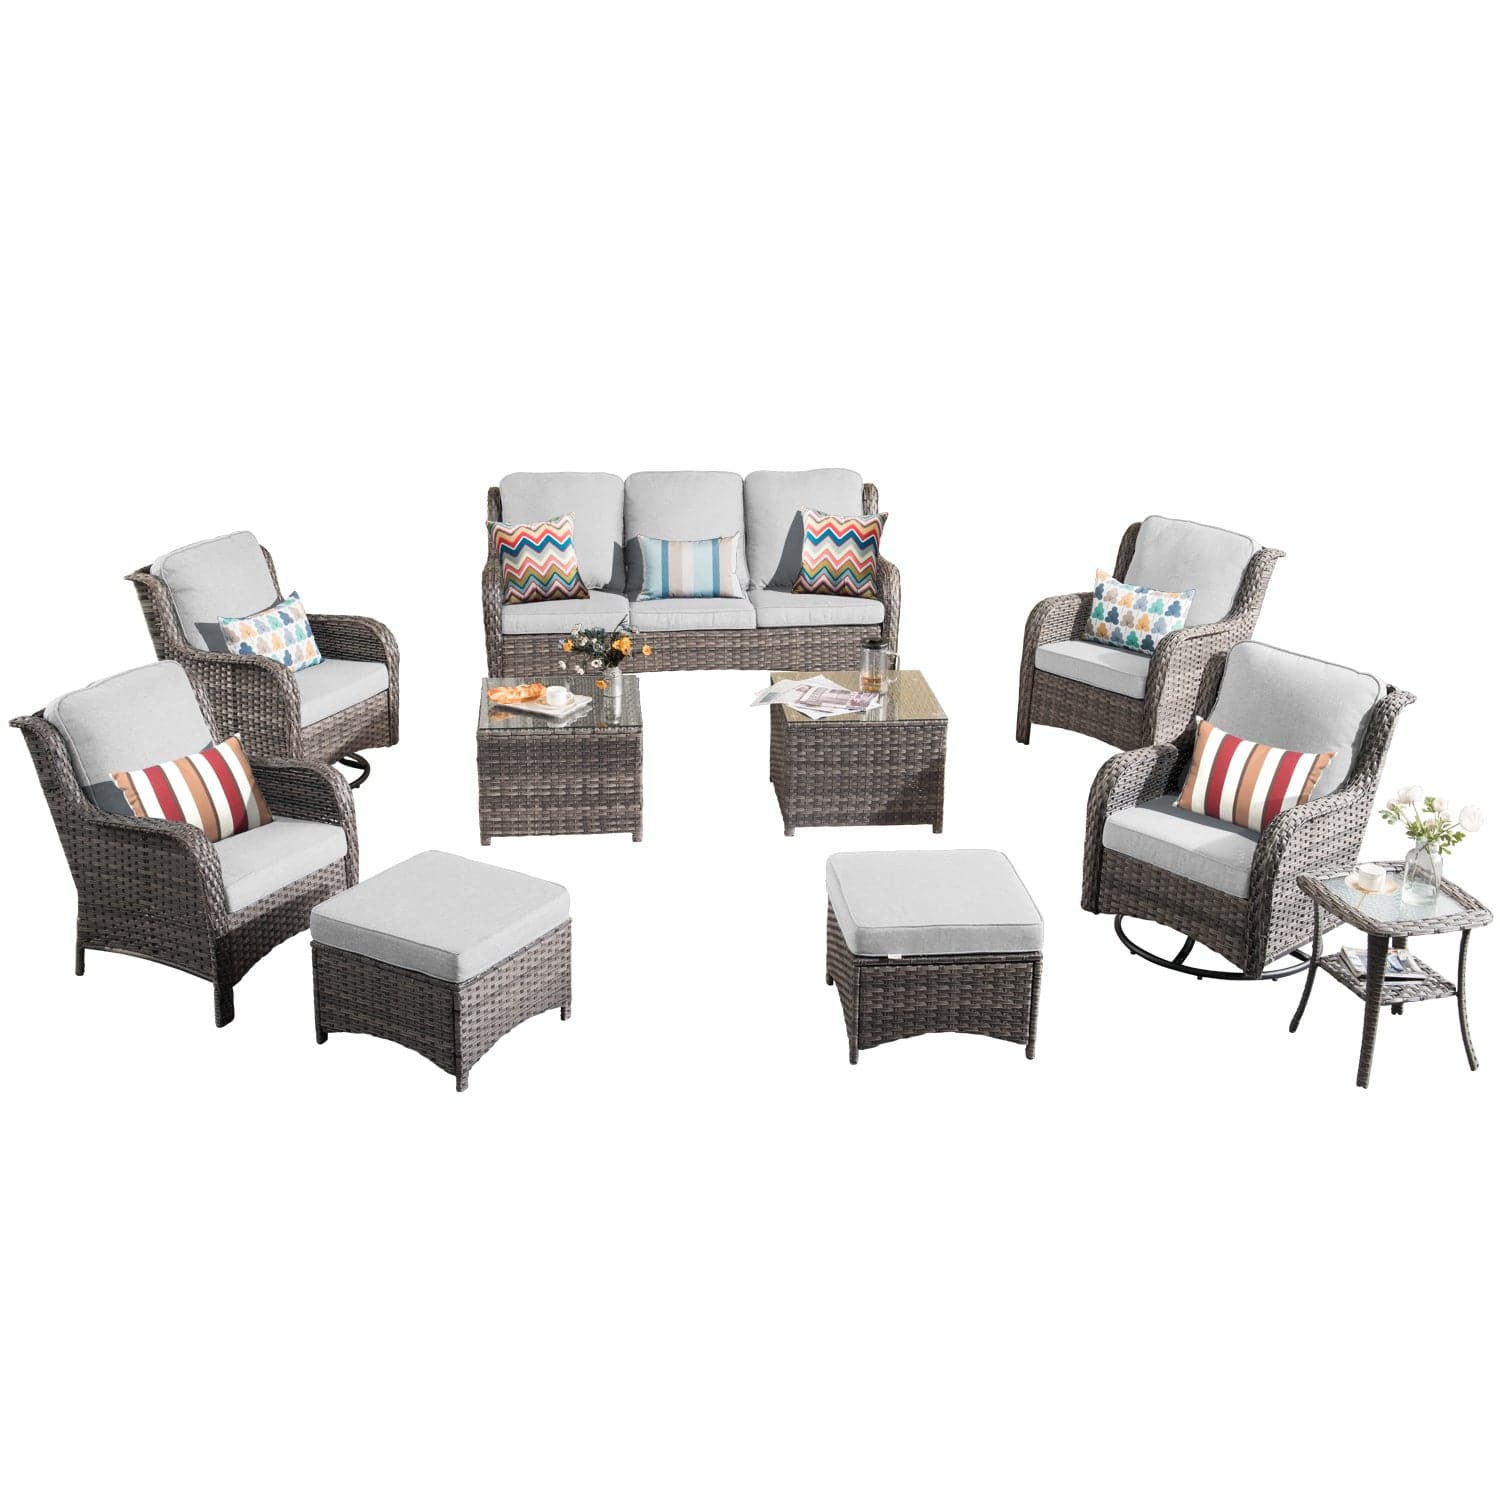 Ovios Patio Conversation Set 10-Piece with Rocking Chairs and Table Kenard